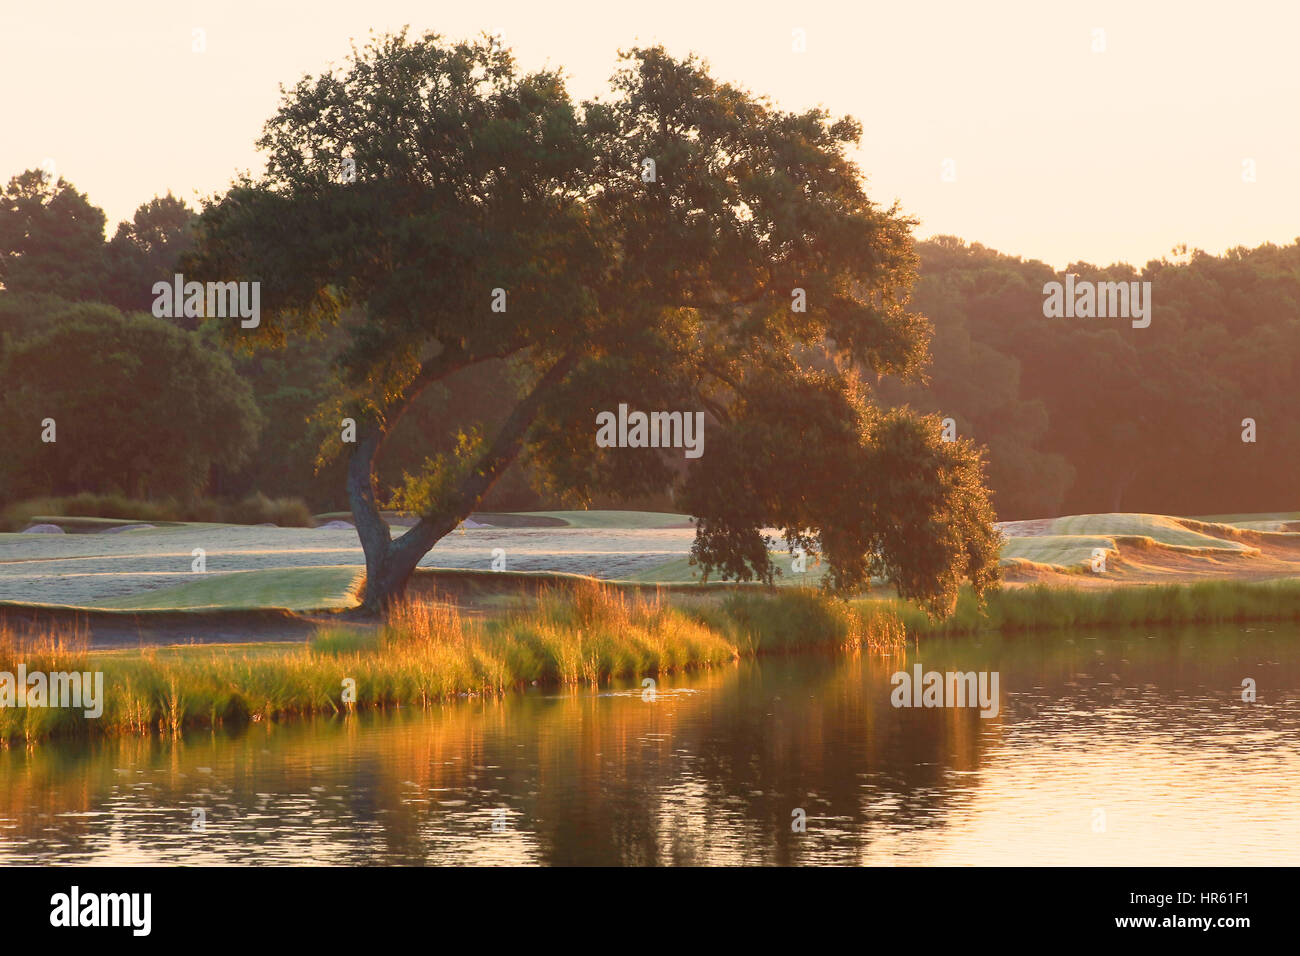 This landscape shows the Kiawah Island Club's River course golf course in the early morning light. Kiawah Island, South Carolina. Stock Photo